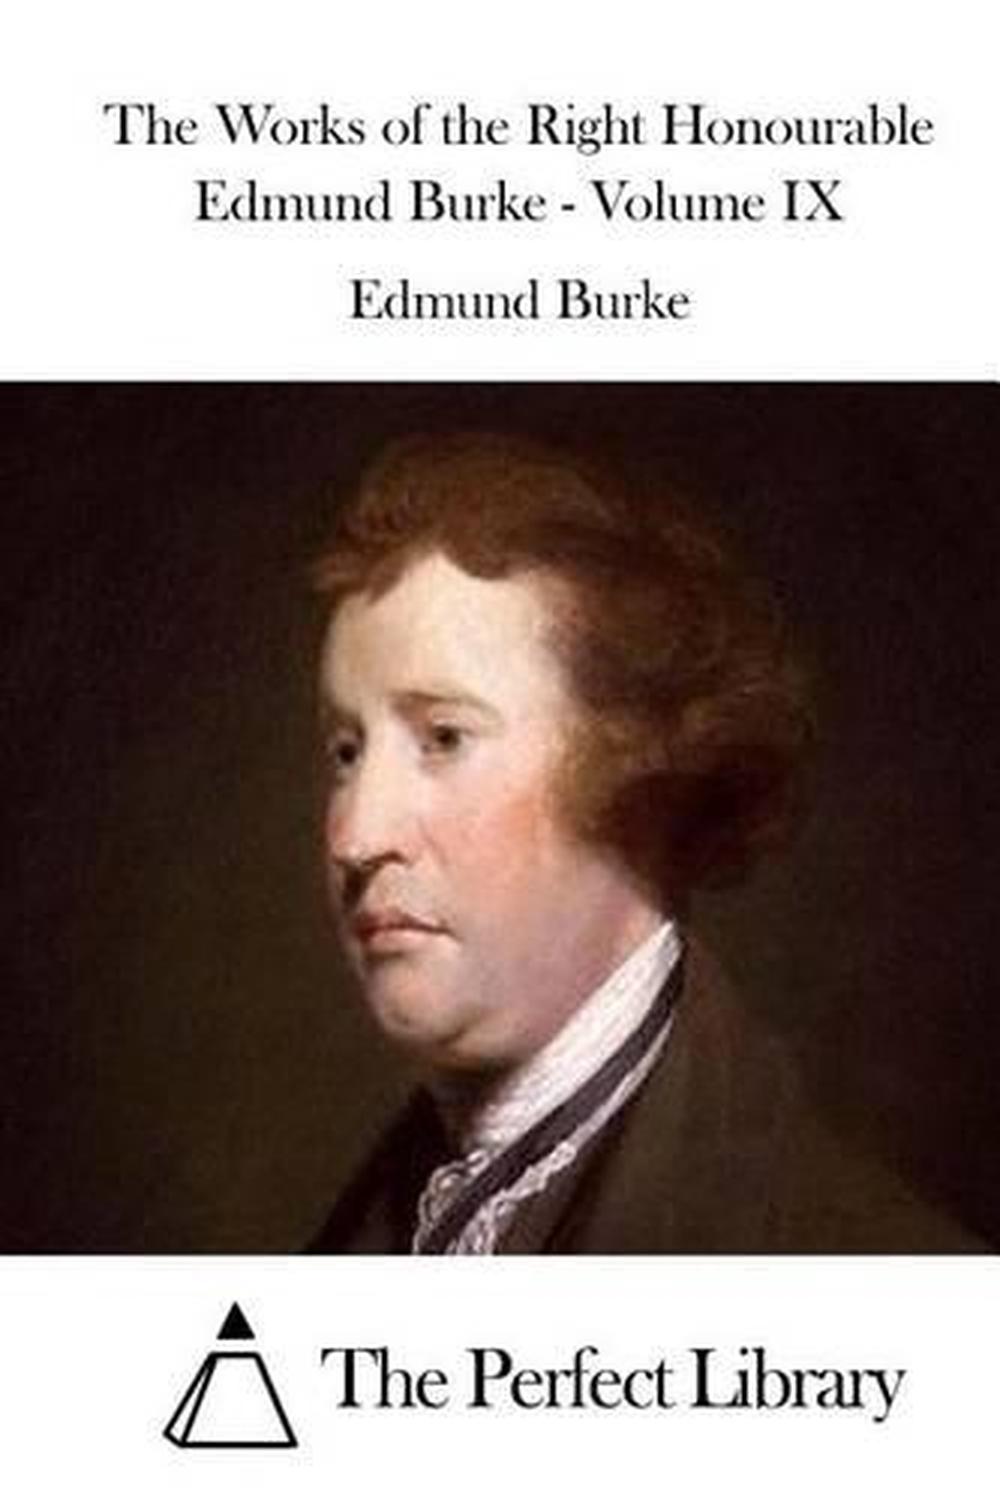 The Works of the Right Honourable Edmund Burke - Volume IX by Edmund ...